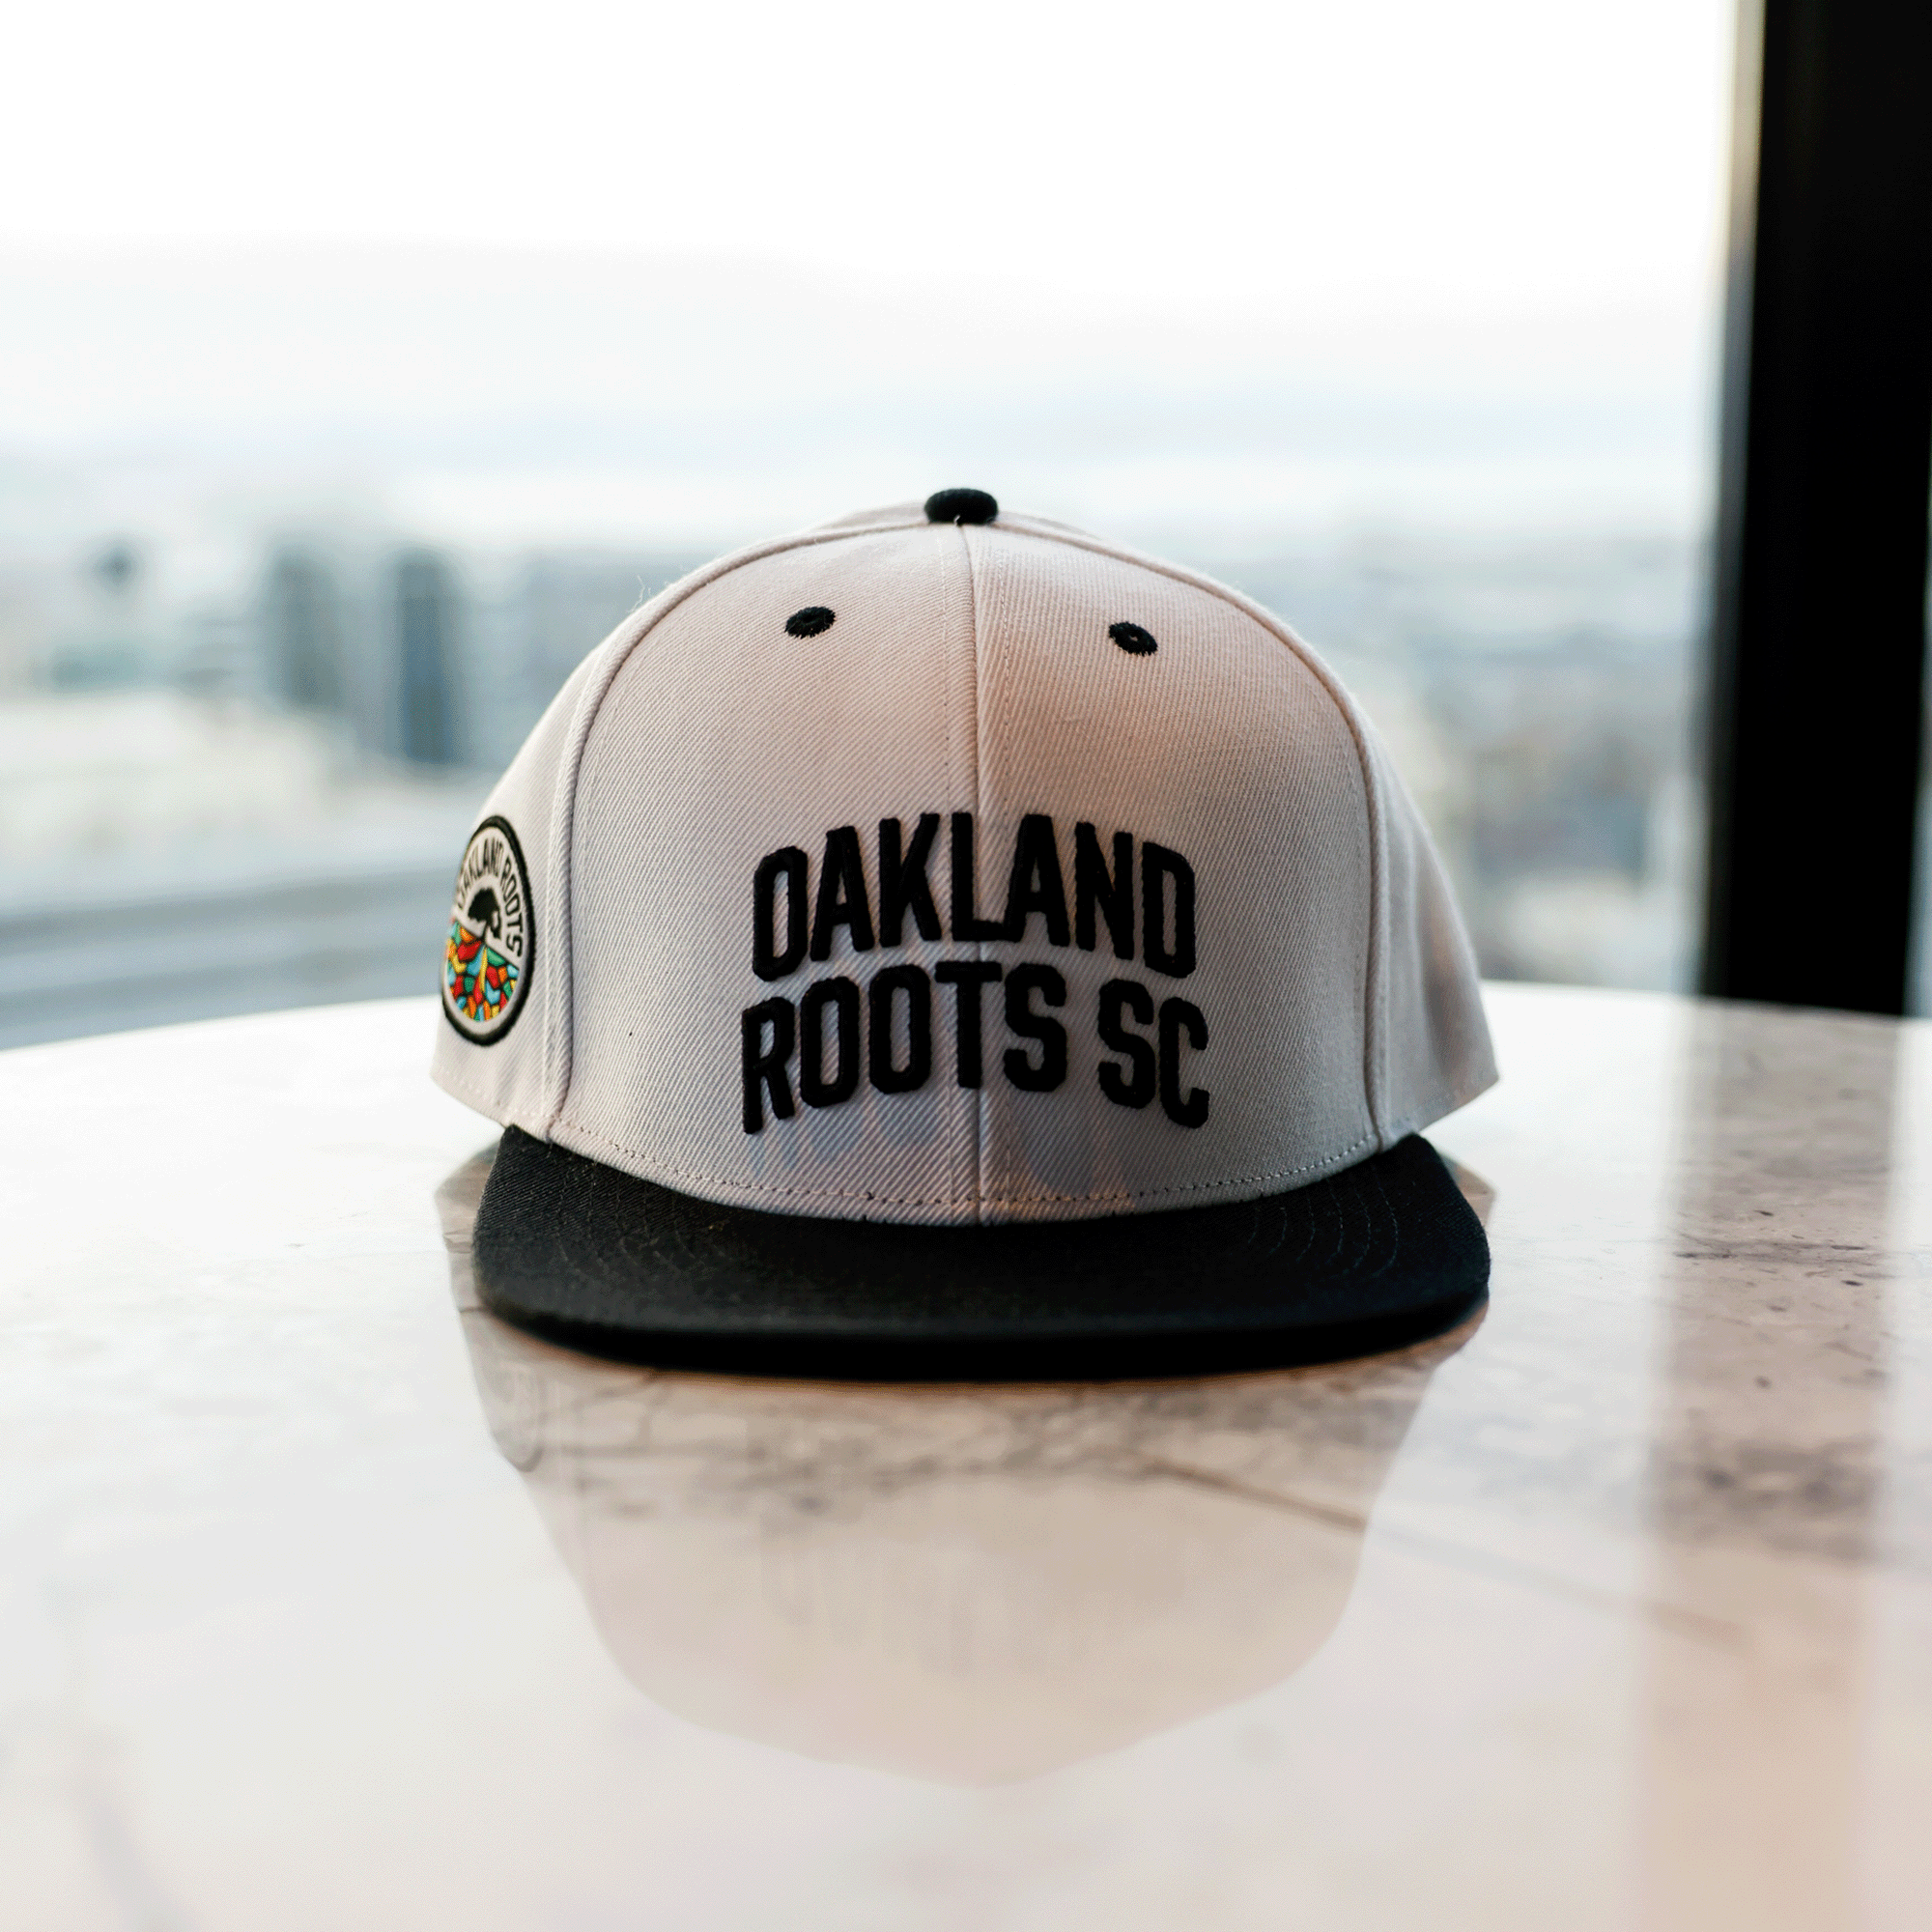 White snapback hat with black embroidered Oakland Roots SC wordmark, full-color Roots SC logo, black flat square bill and black embroidered details sitting on counter top.